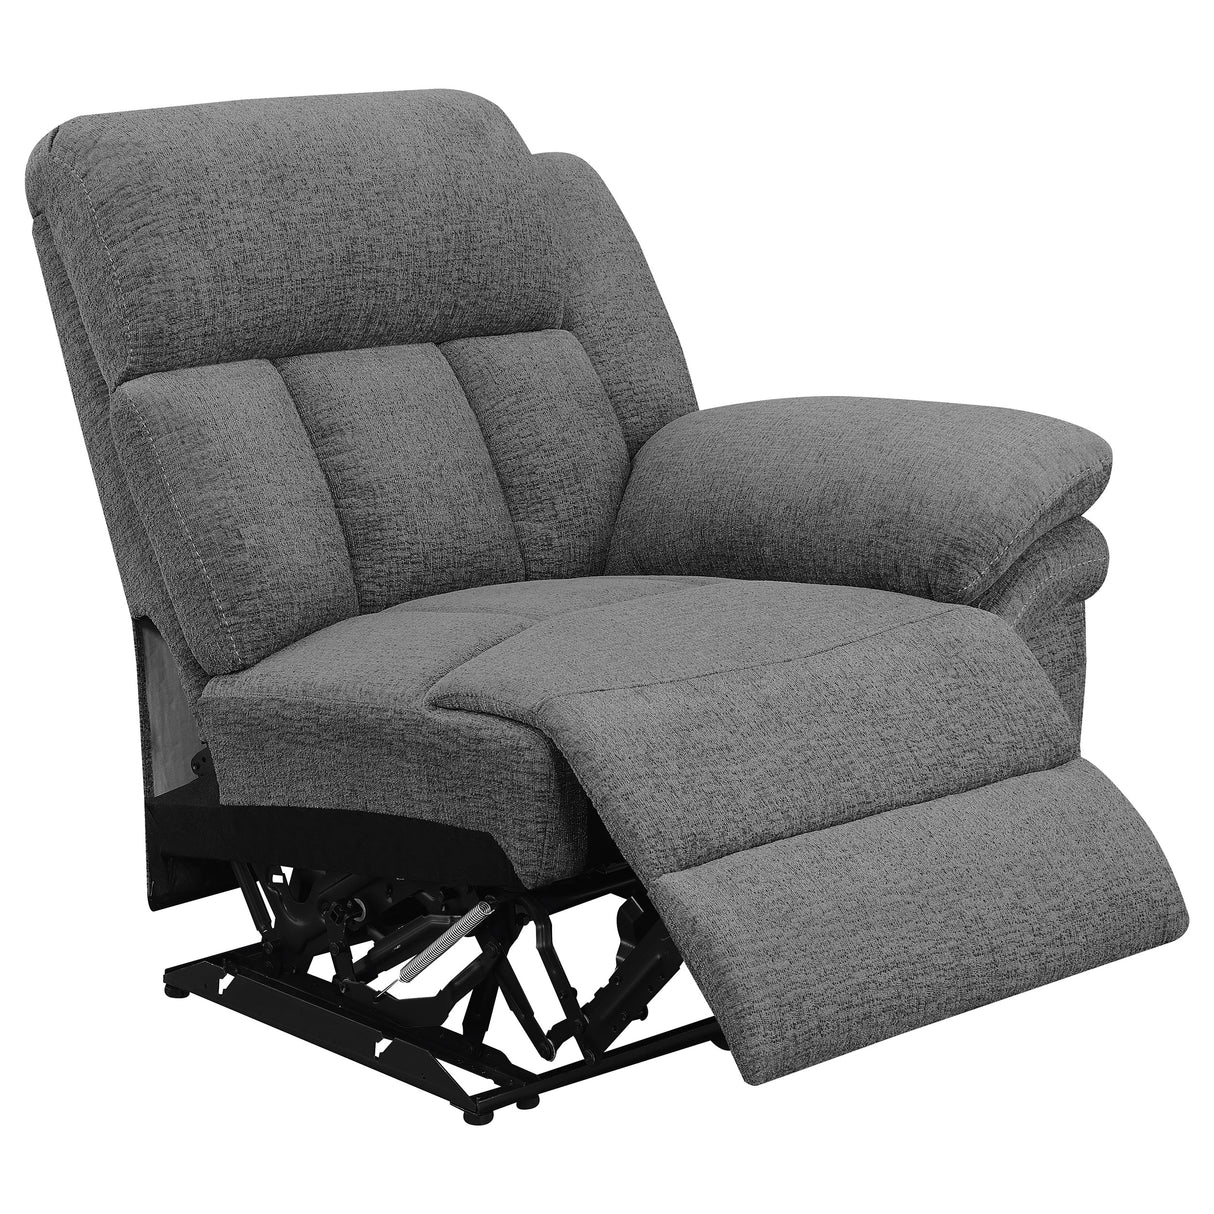 Motion Loveseat - Bahrain Upholstered Motion Loveseat with Console Charcoal